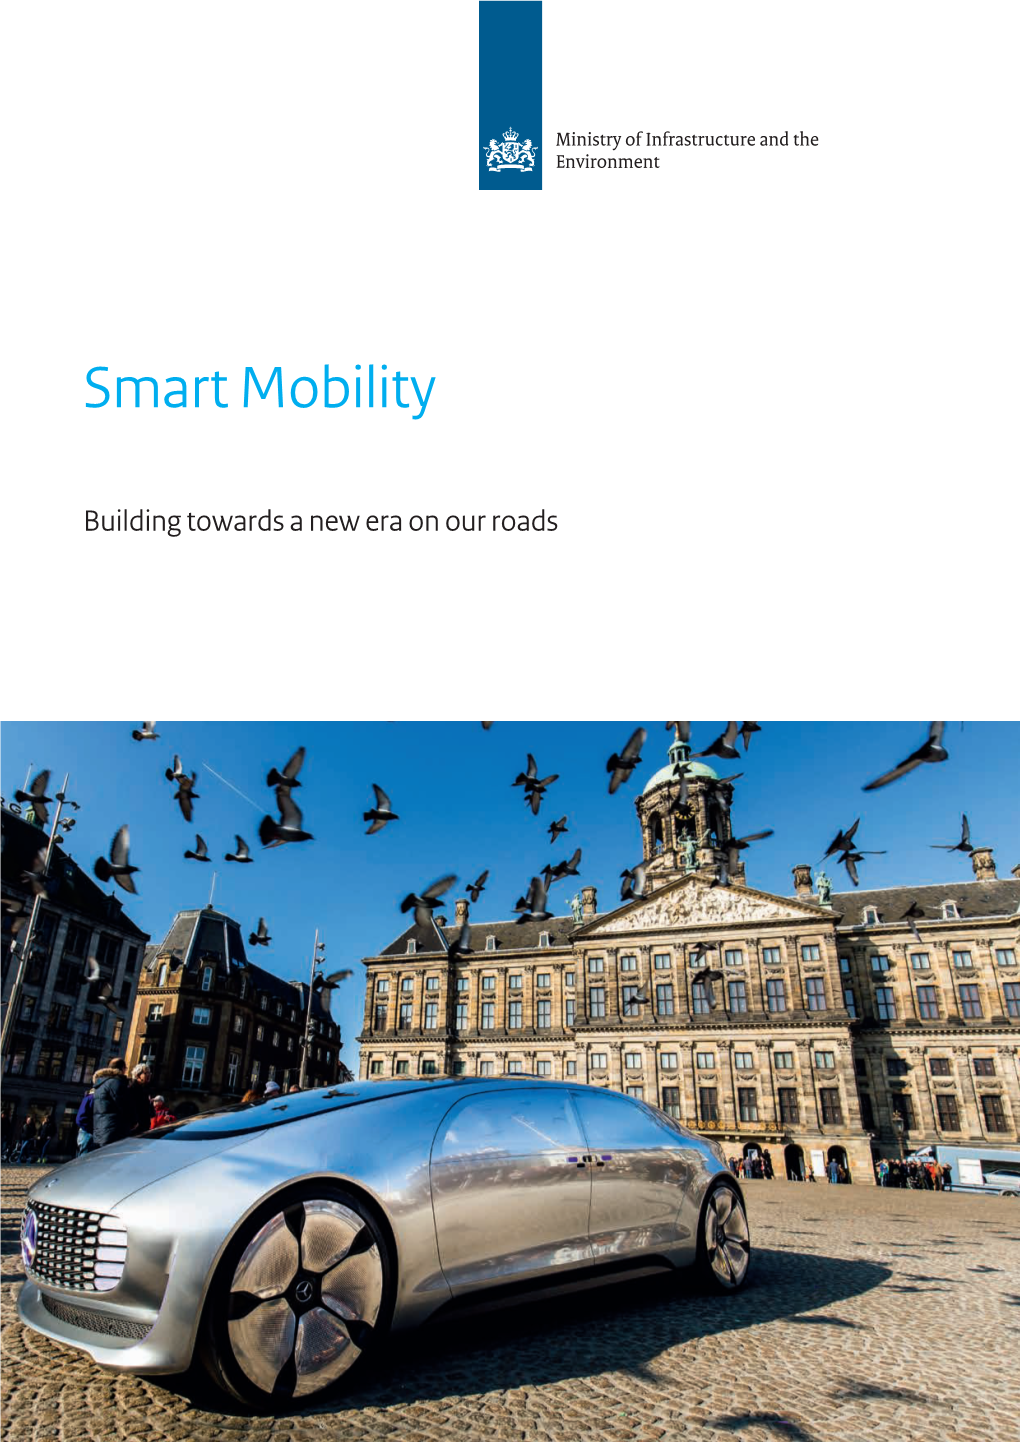 "Smart Mobility, Building Towards a New Era on Our